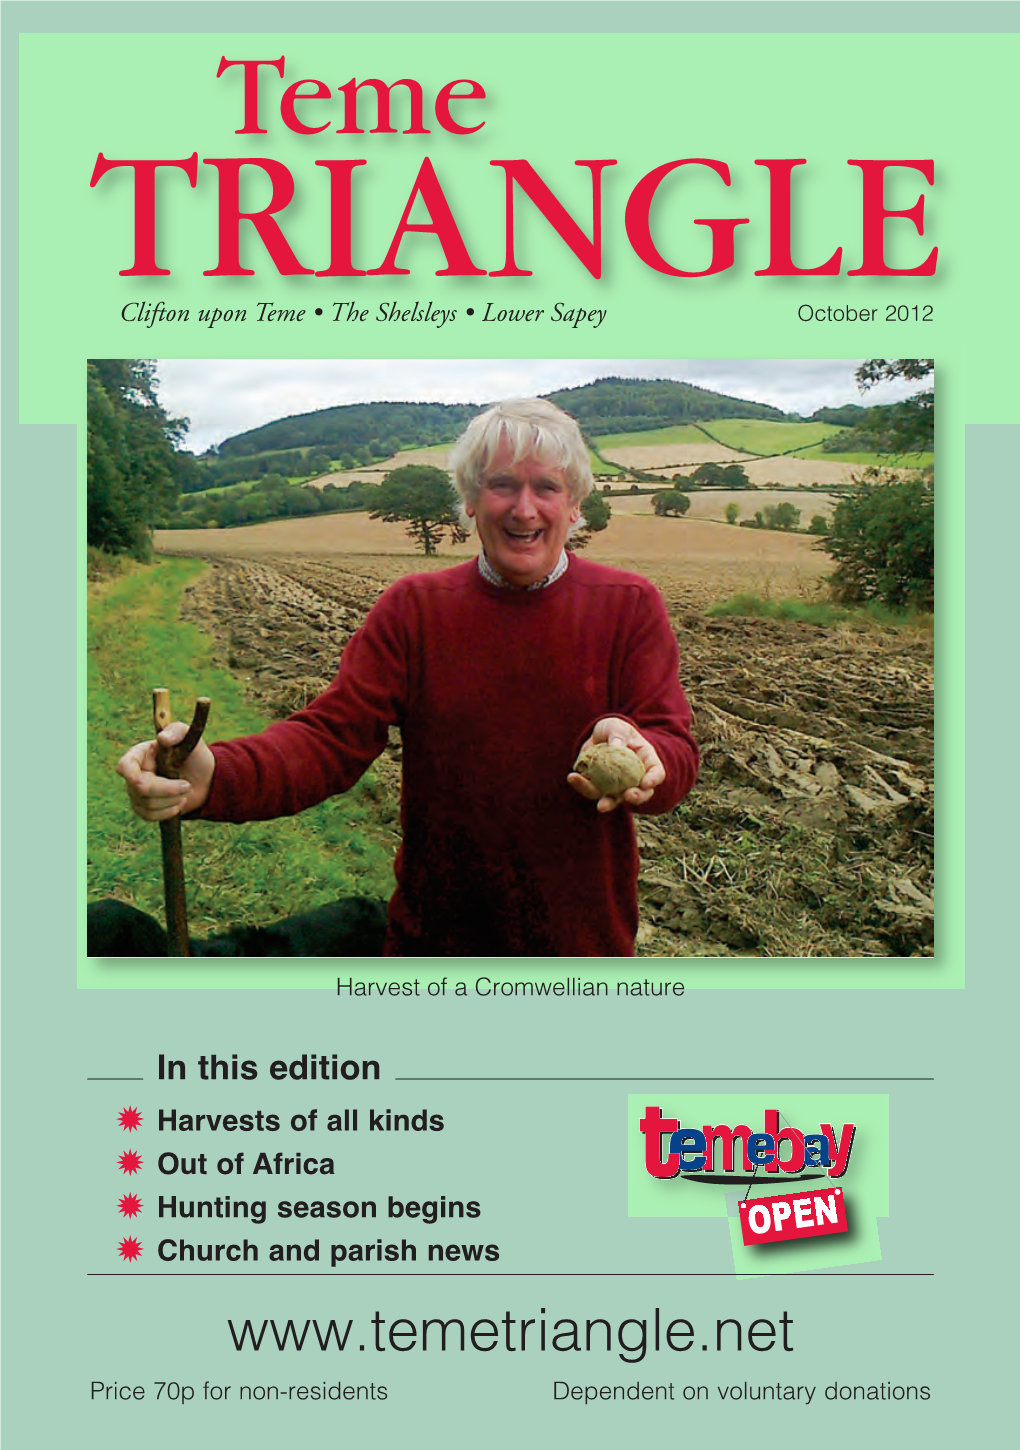 Triangle April 04.Qxd 25/09/2012 10:42 Page 1 Teme TRIANGLE Clifton Upon Teme • the Shelsleys • Lower Sapey October 2012